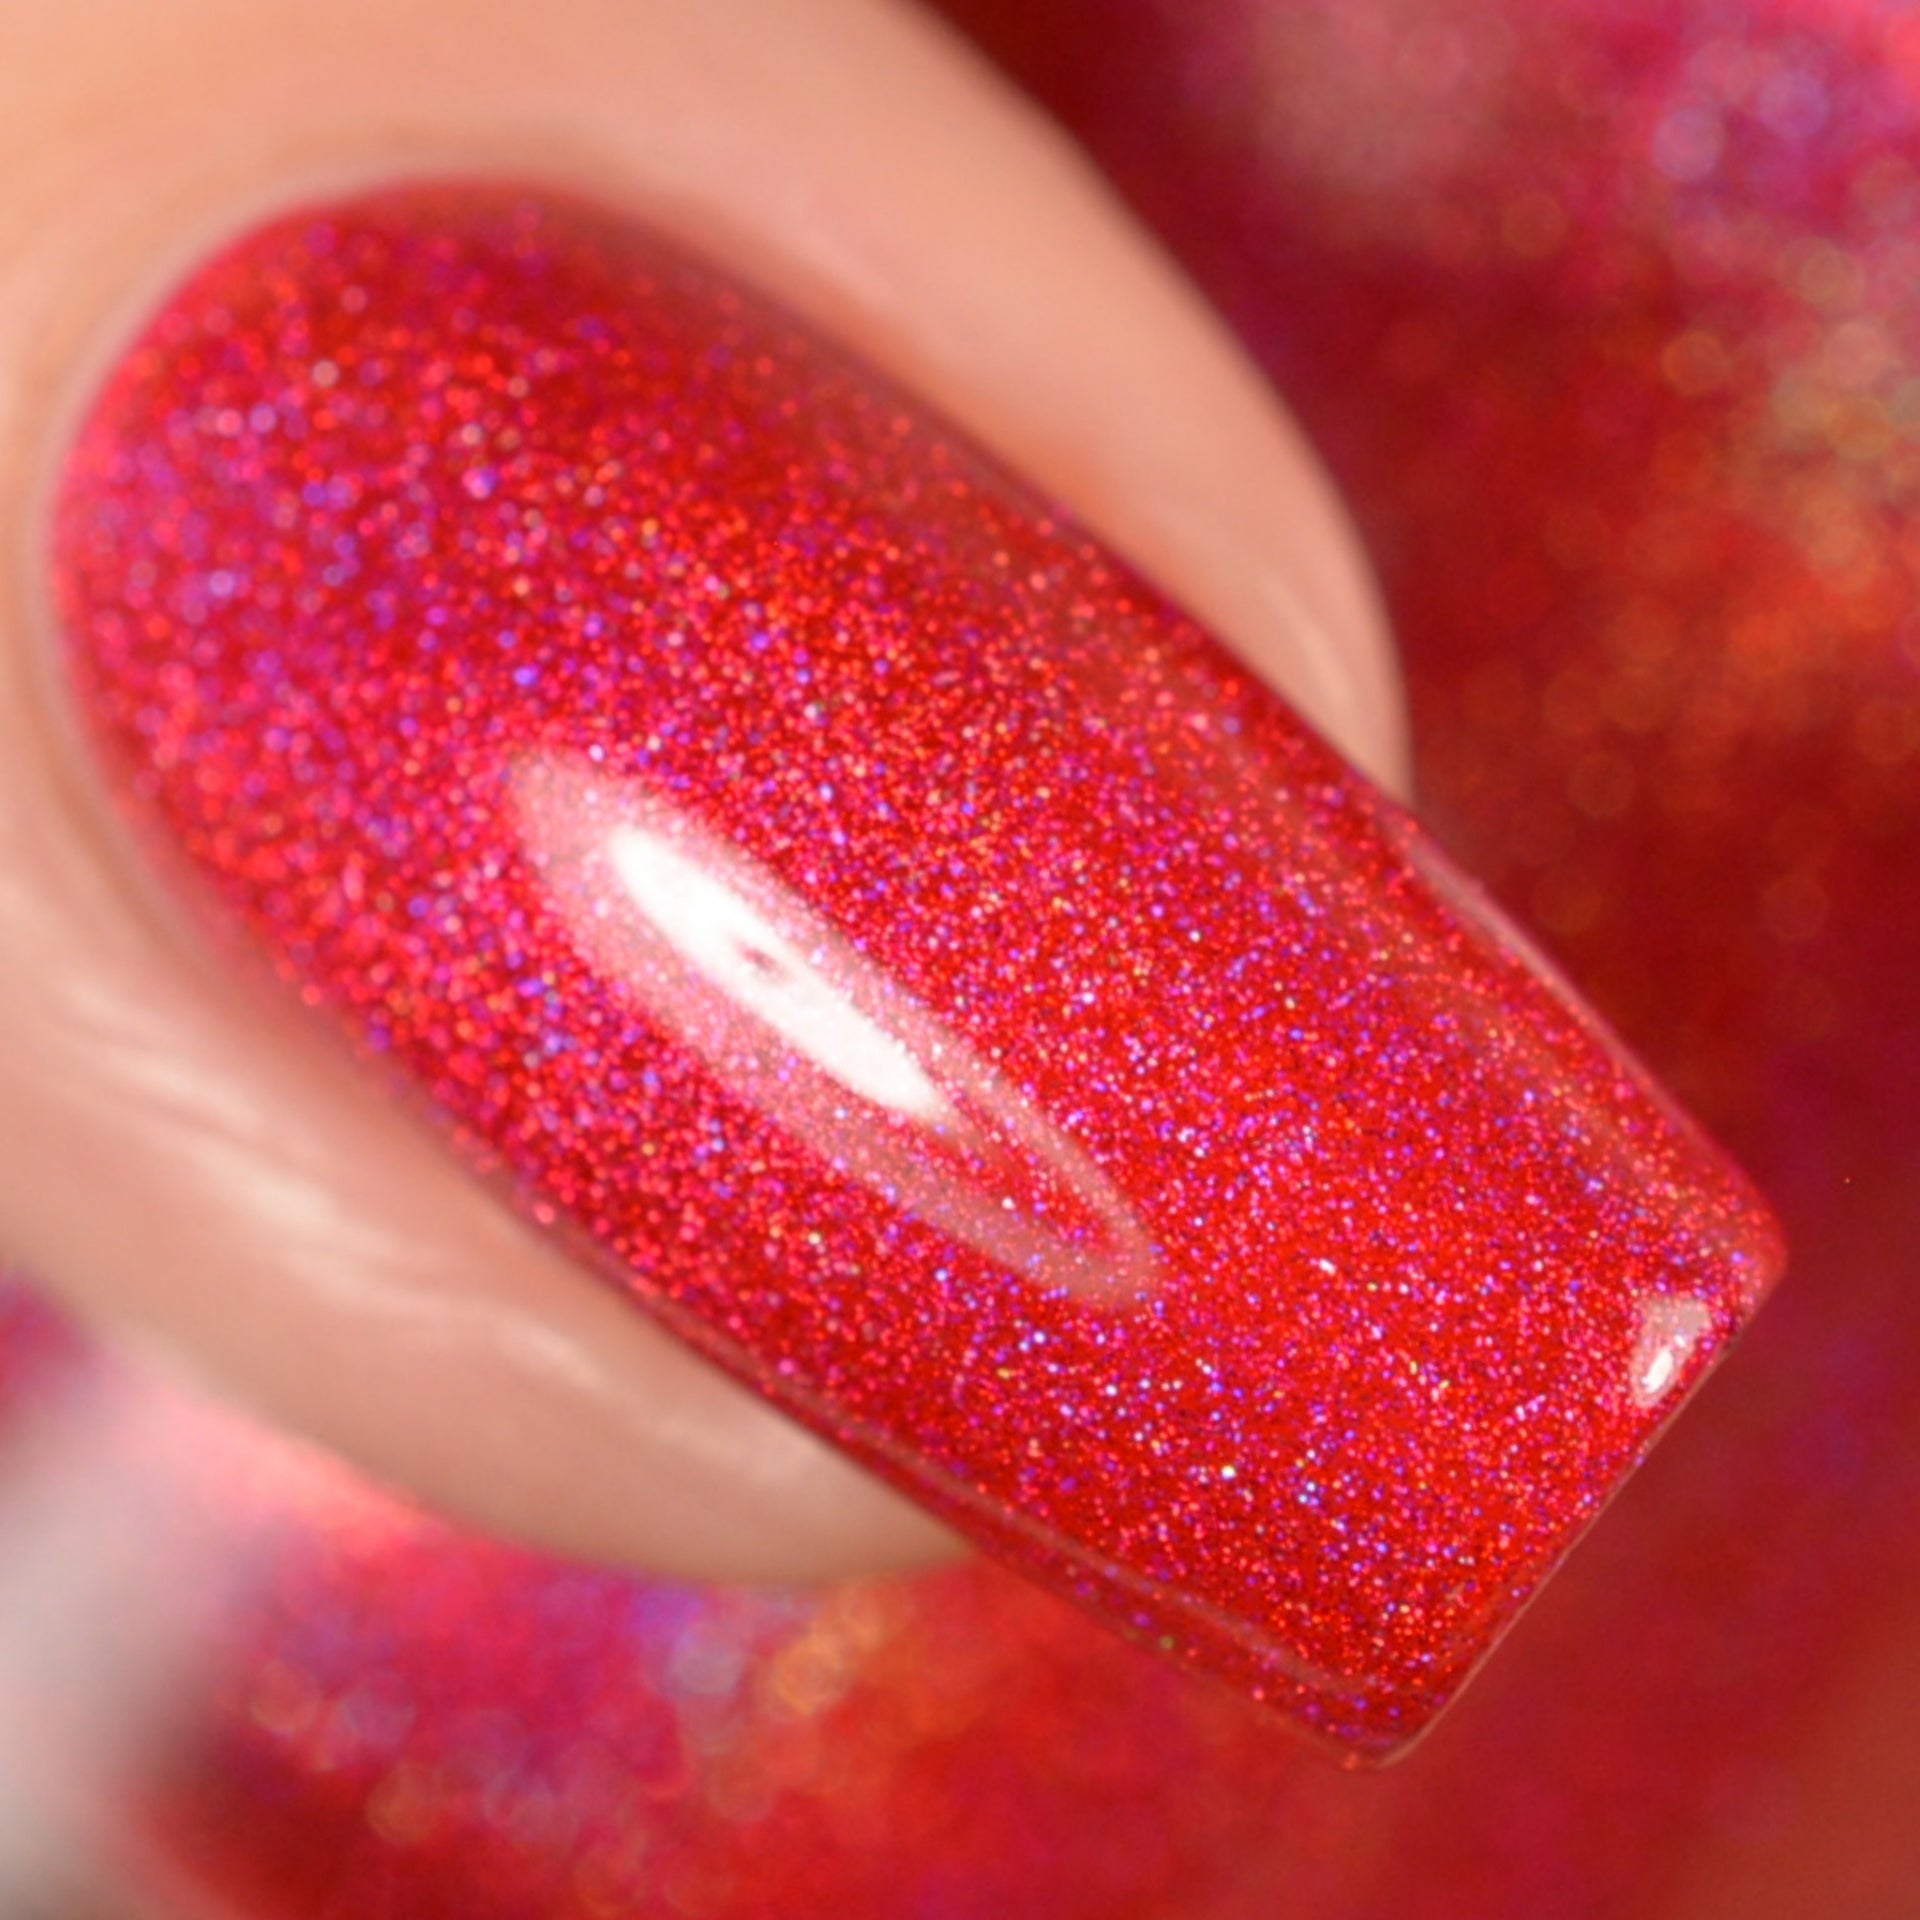 Ruby - Red Holographic Polish - Gemstone Collection Pt. 3 - Dam Nail Polish